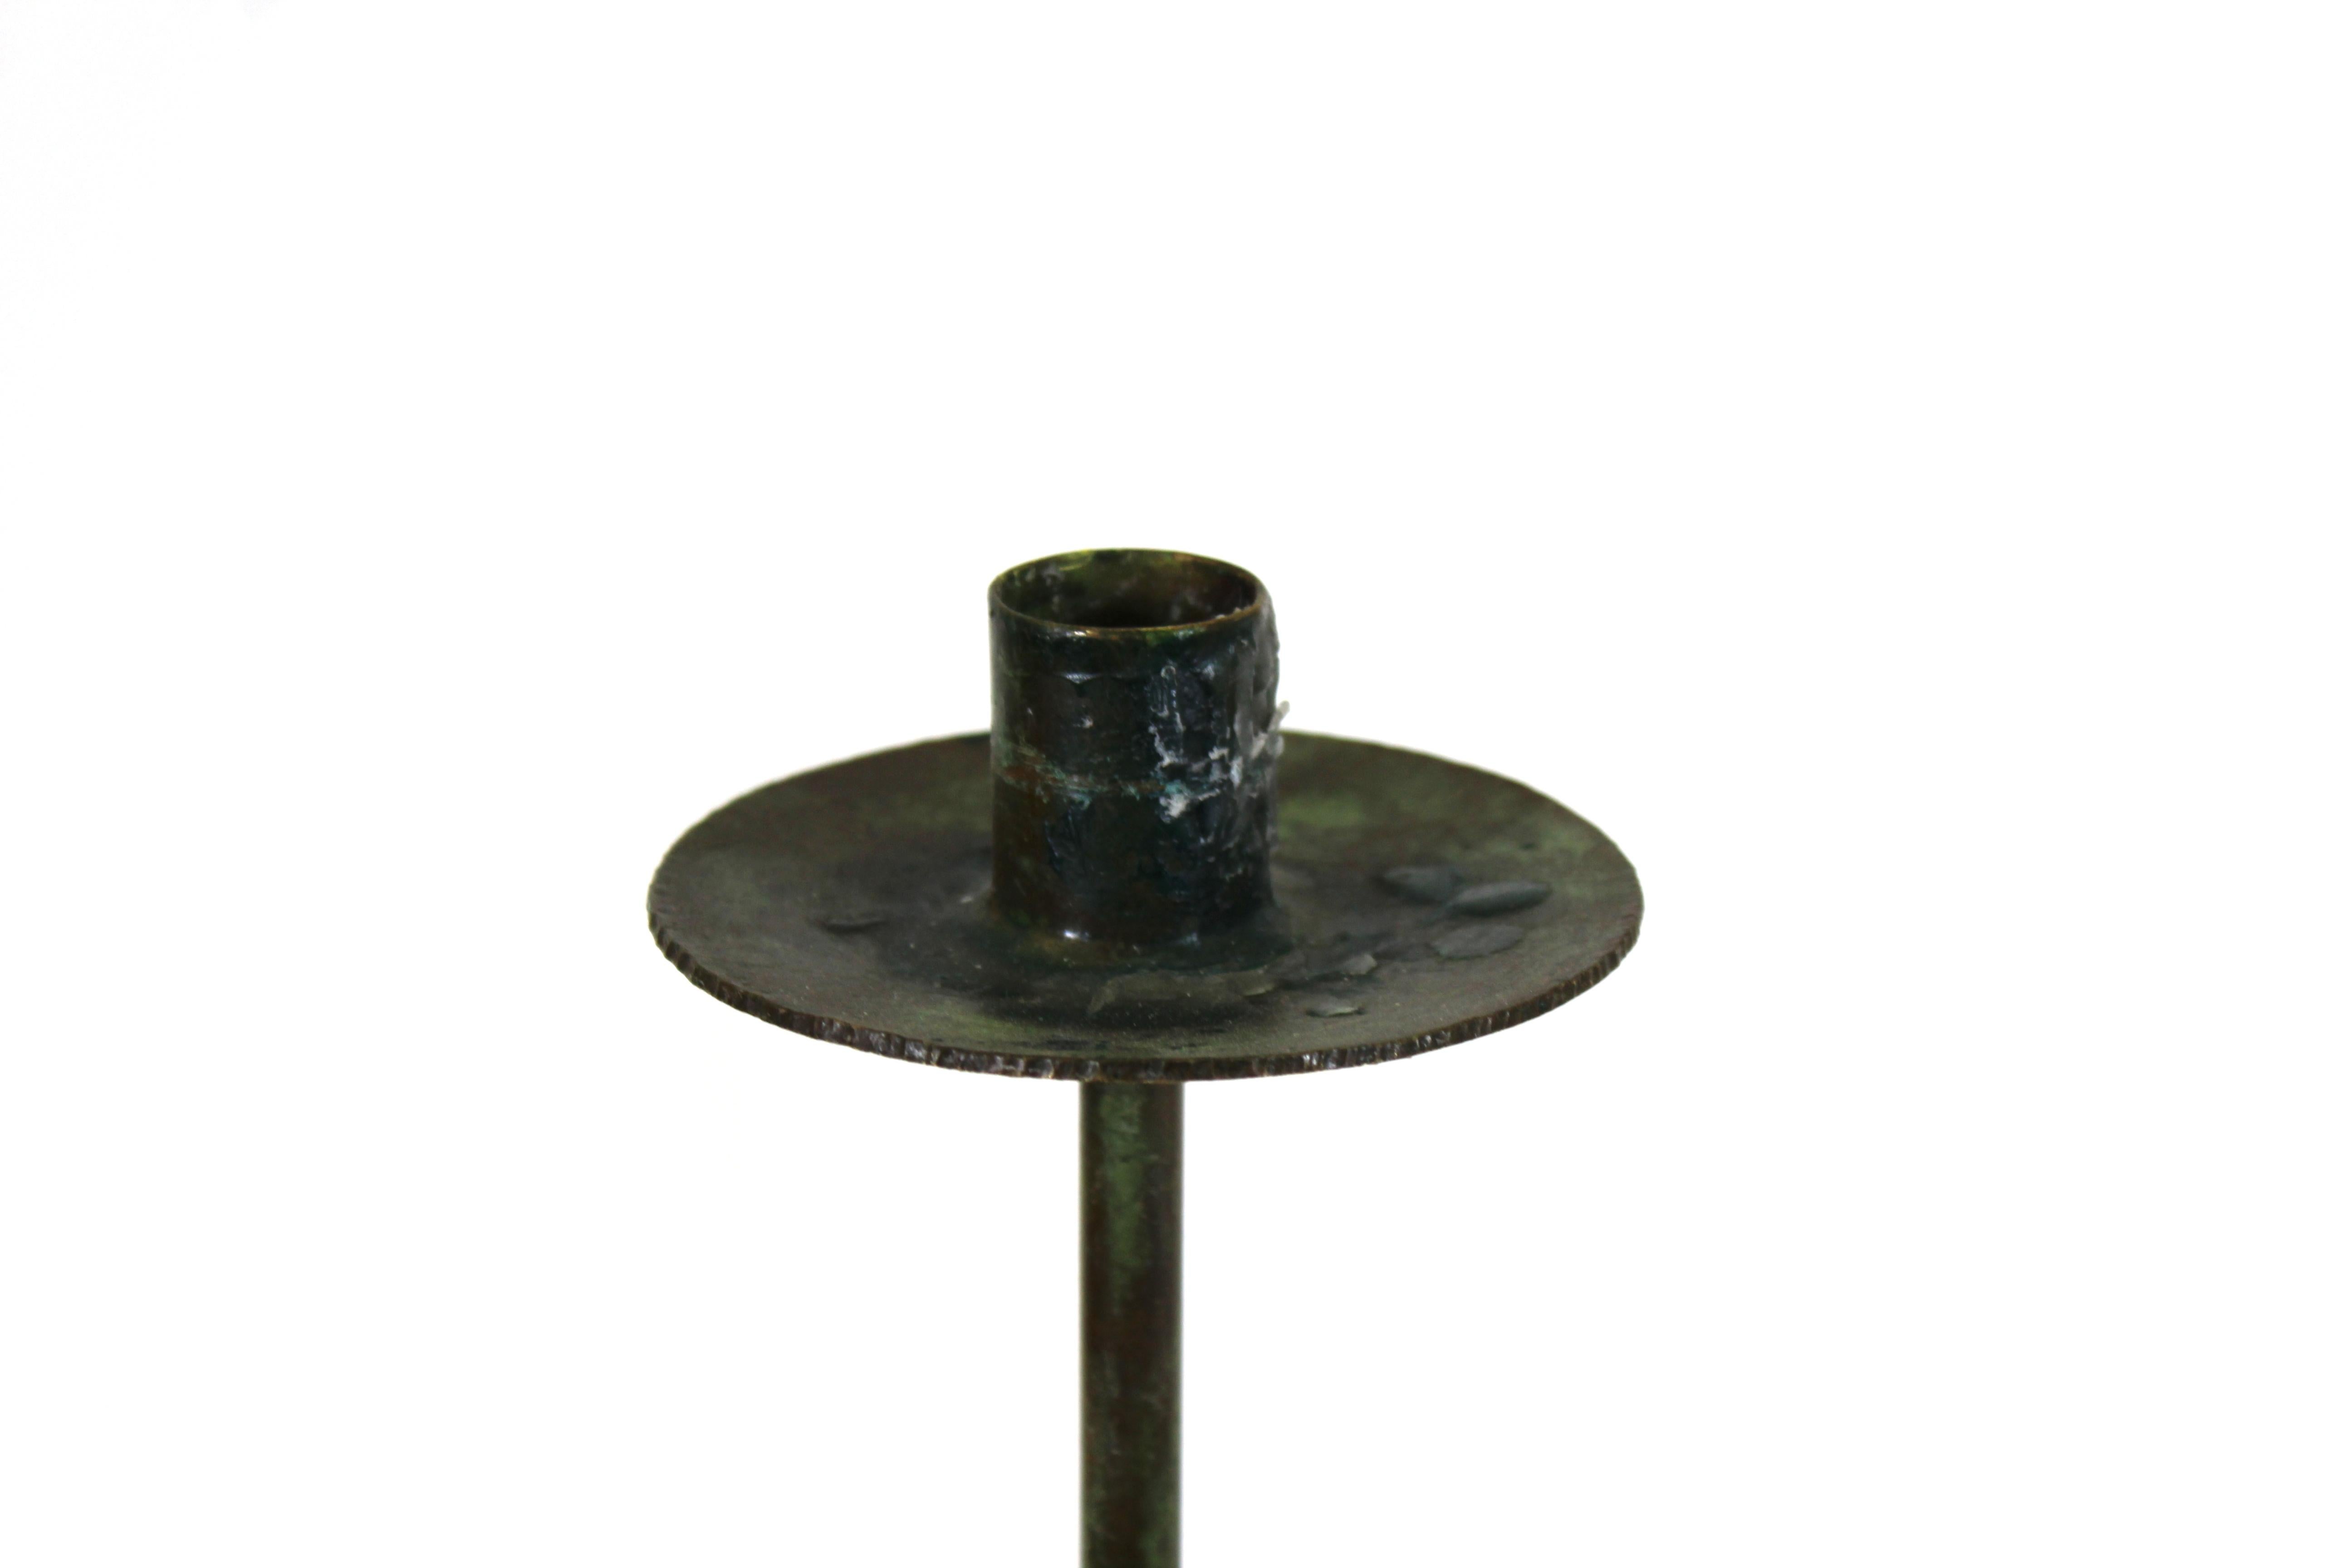 Unknown Modernist Style Metal Tripod Candlesticks with Verdigris Patina